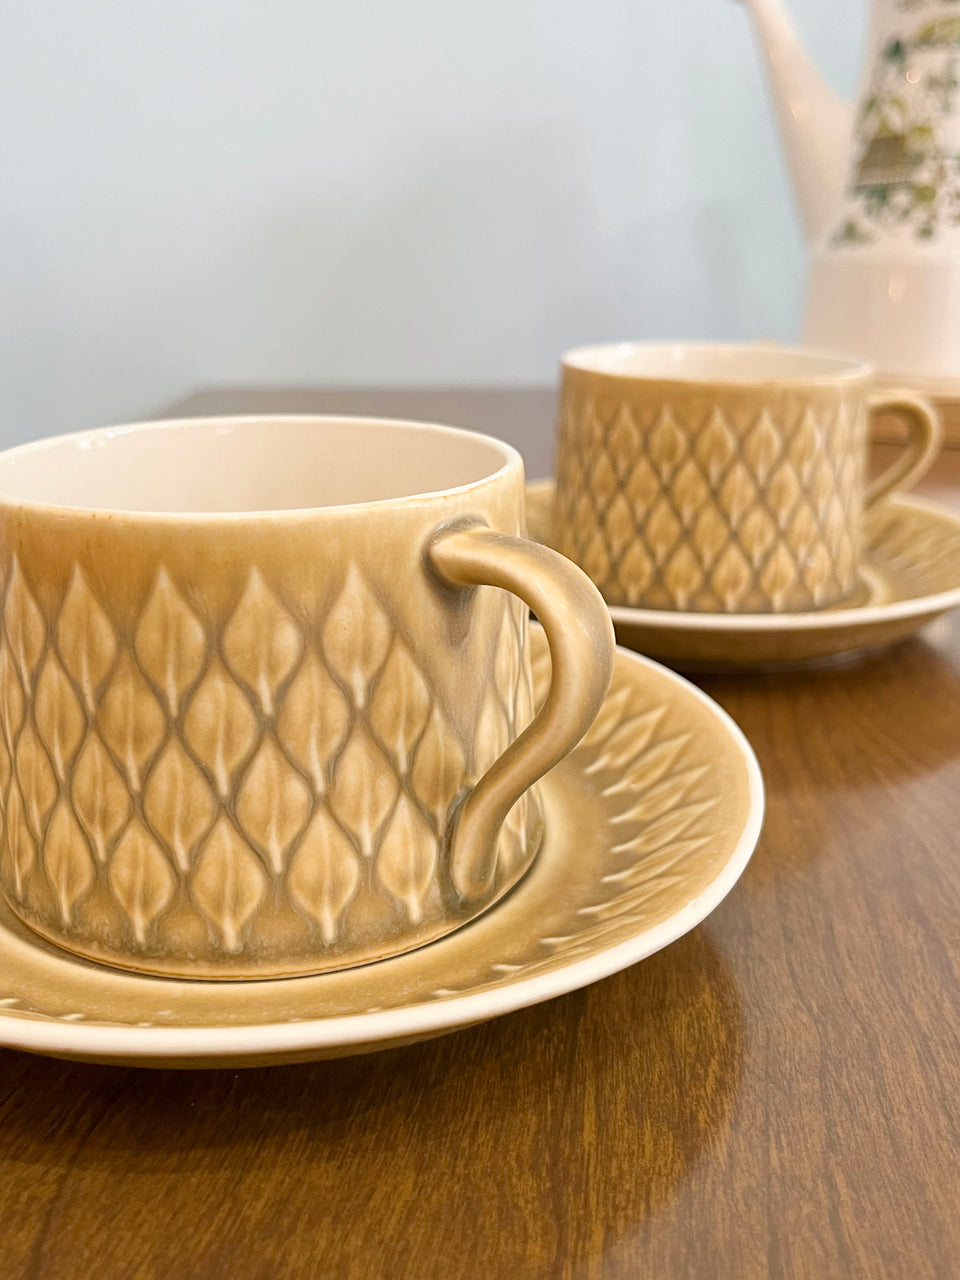 Jens H.Quistgaard Relief Teacup and Saucer/レリーフ ティーカップアンドソーサー イェンス・クイストゴー 北欧ヴィンテージ食器